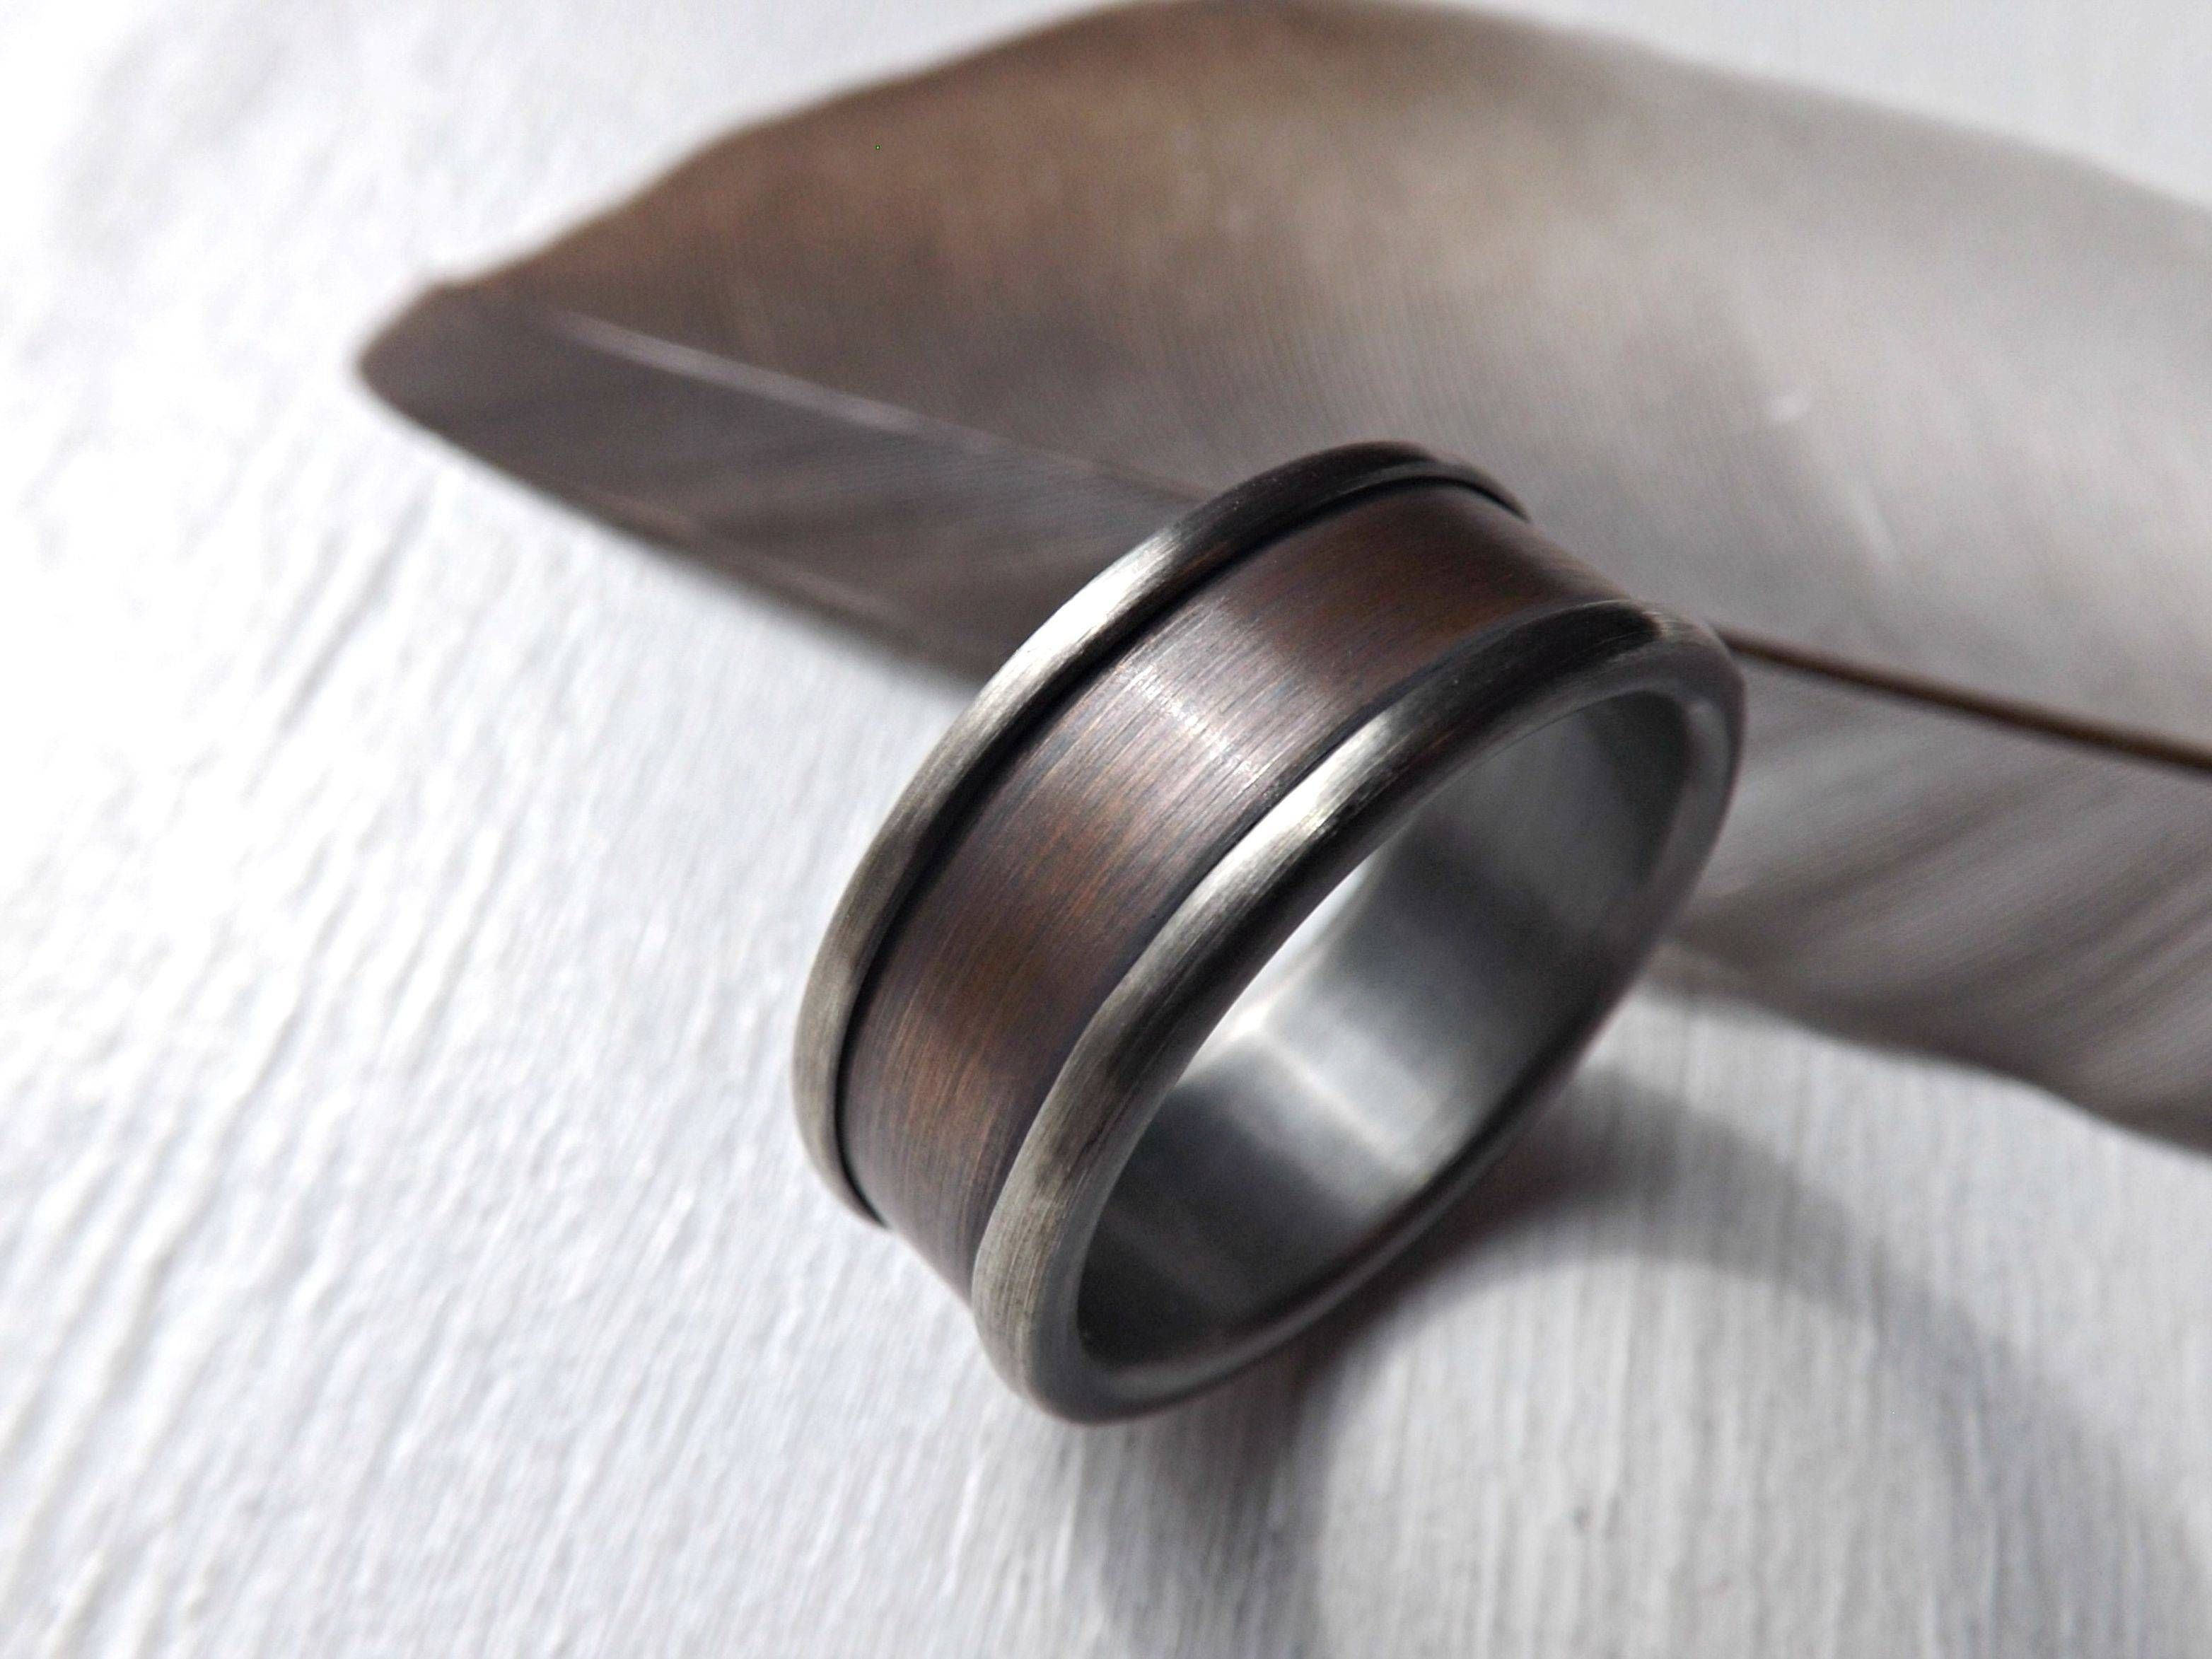 Buy A Hand Made Silver Bronze Ring For Men, Unique Mens Wedding Within Mens Custom Wedding Rings (View 10 of 15)